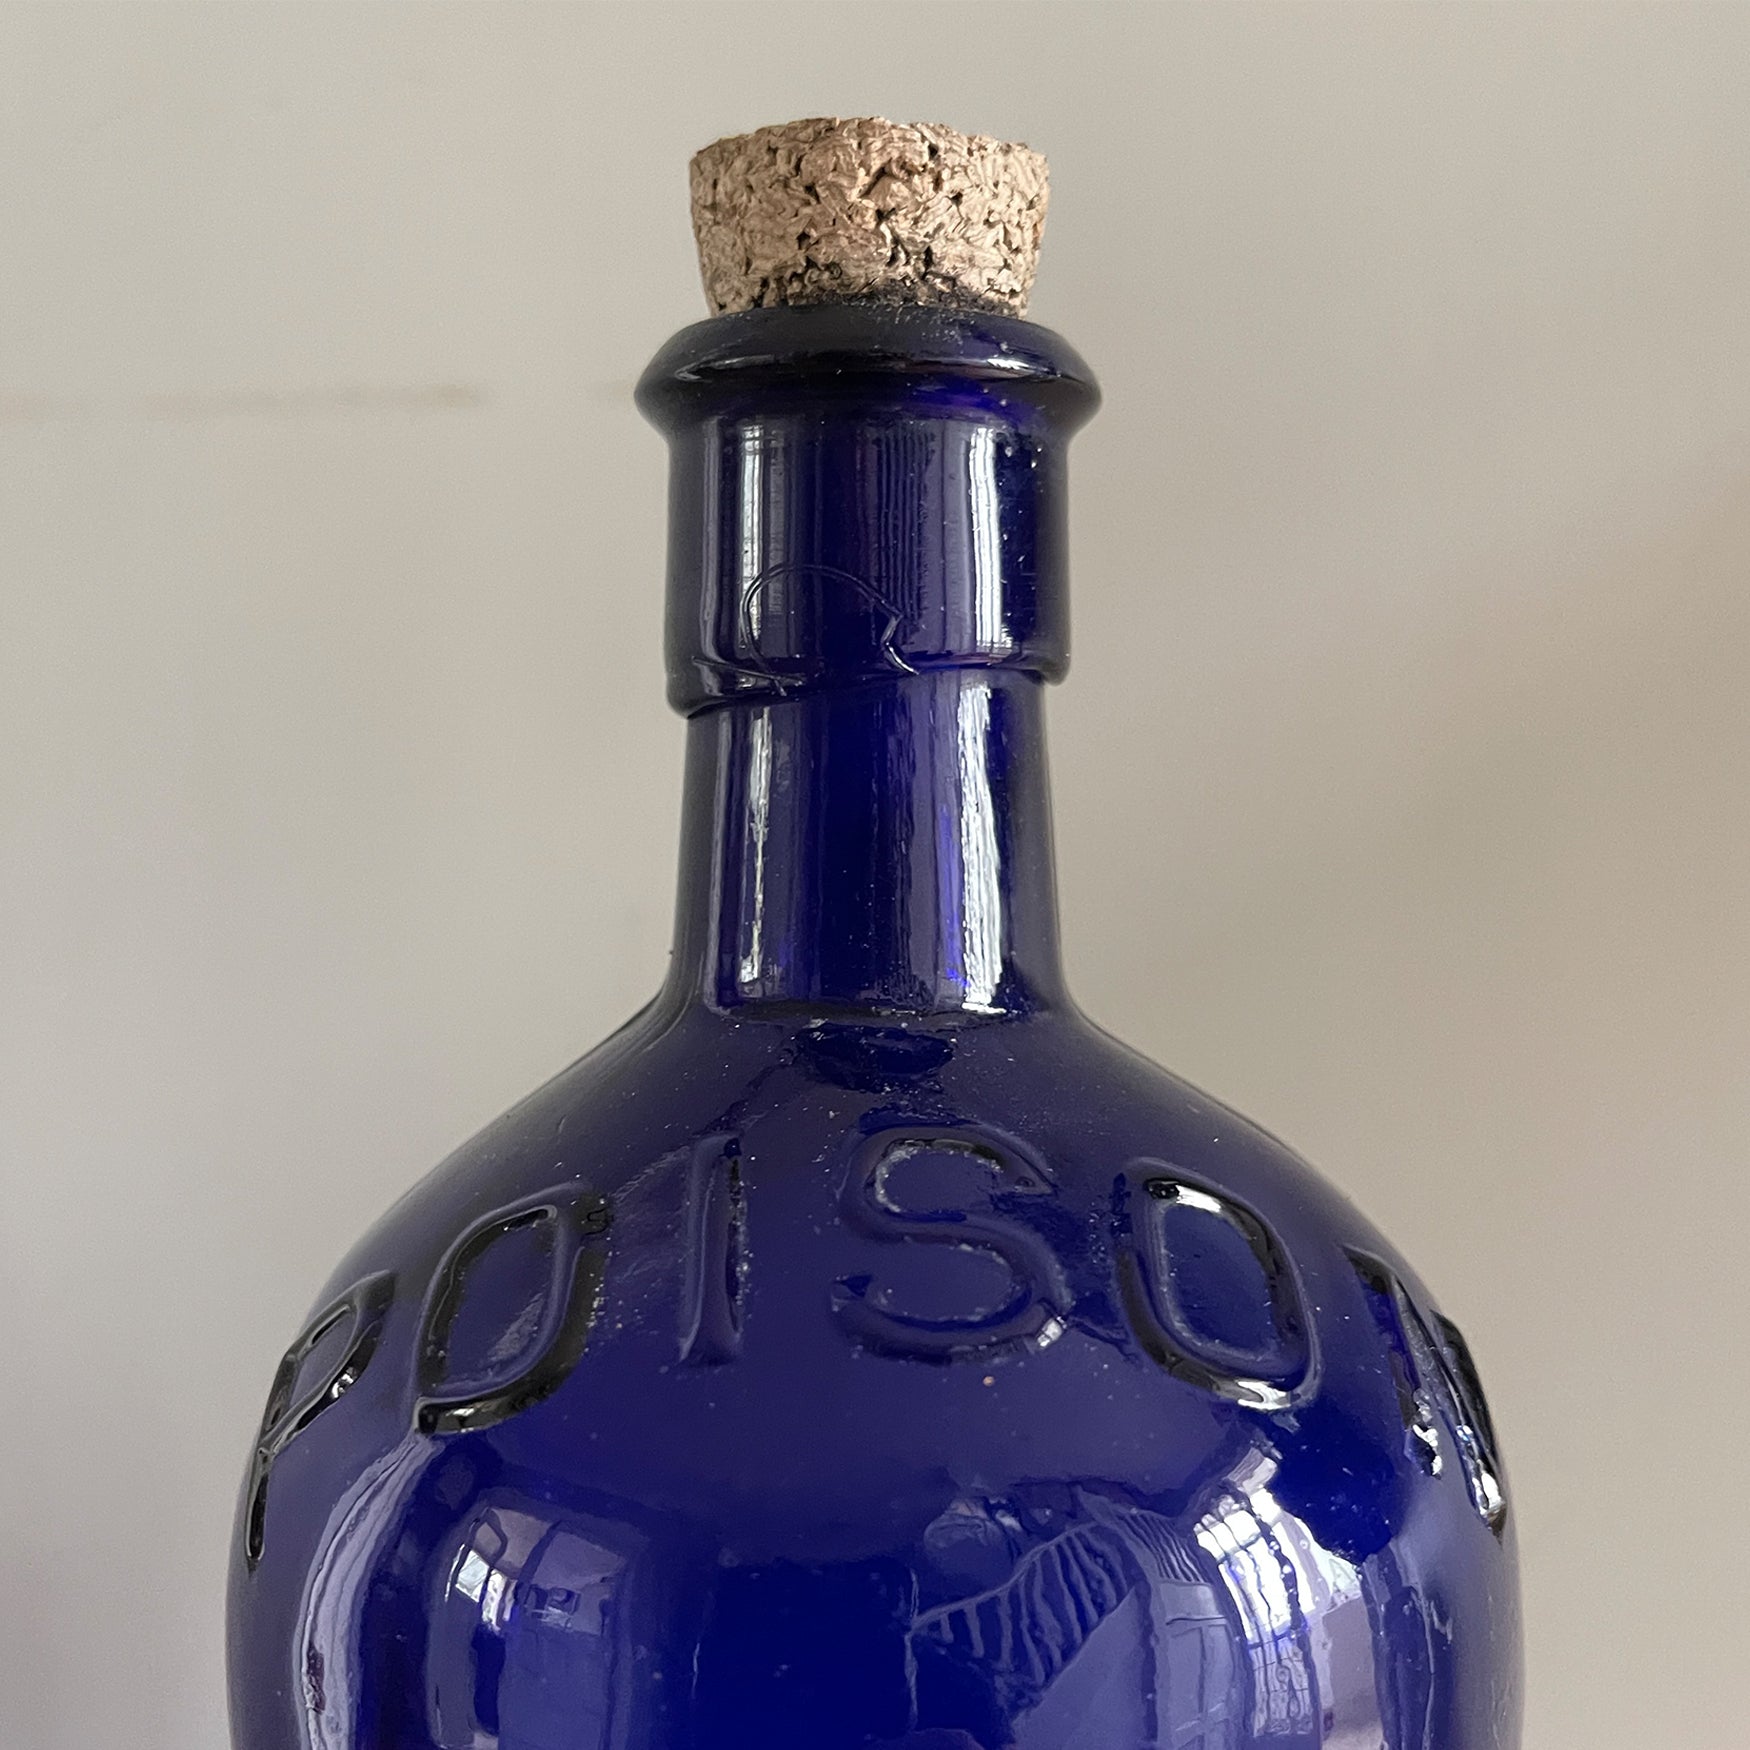 A Large Victorian Poison Bottle with cork stopper. It has fluted sides and two moulded 'POISON' words across the front and back shoulders. These bottles look great displayed in the bathroom or in a curio cabinet - SHOP NOW - www.intovintage.co.uk